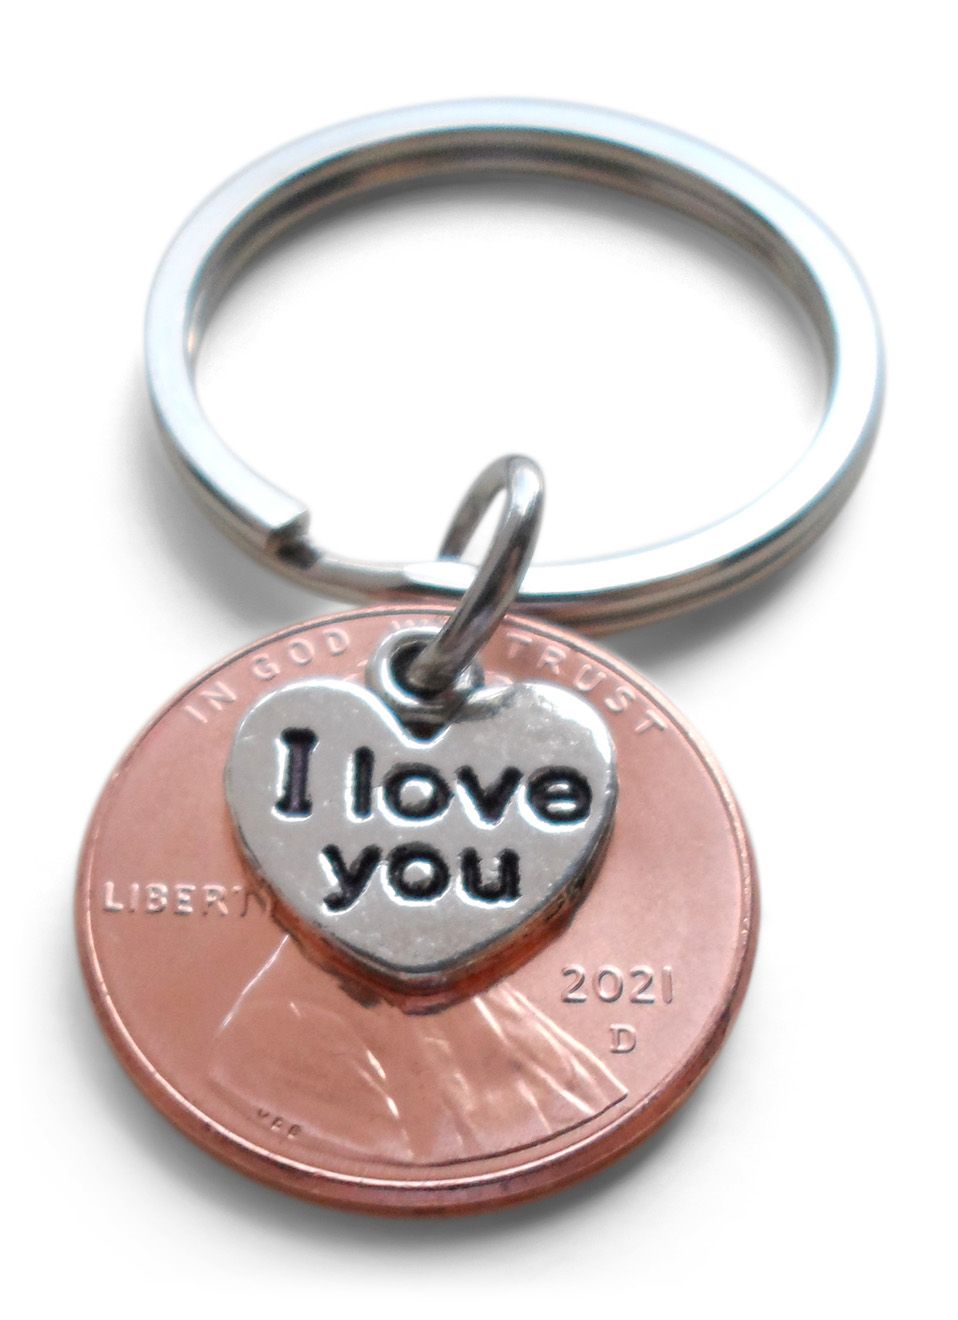 I Love You Heart Charm Layered Over 2021 US One Cent Penny Keychain; Anniversary Gift, Couples Keychain